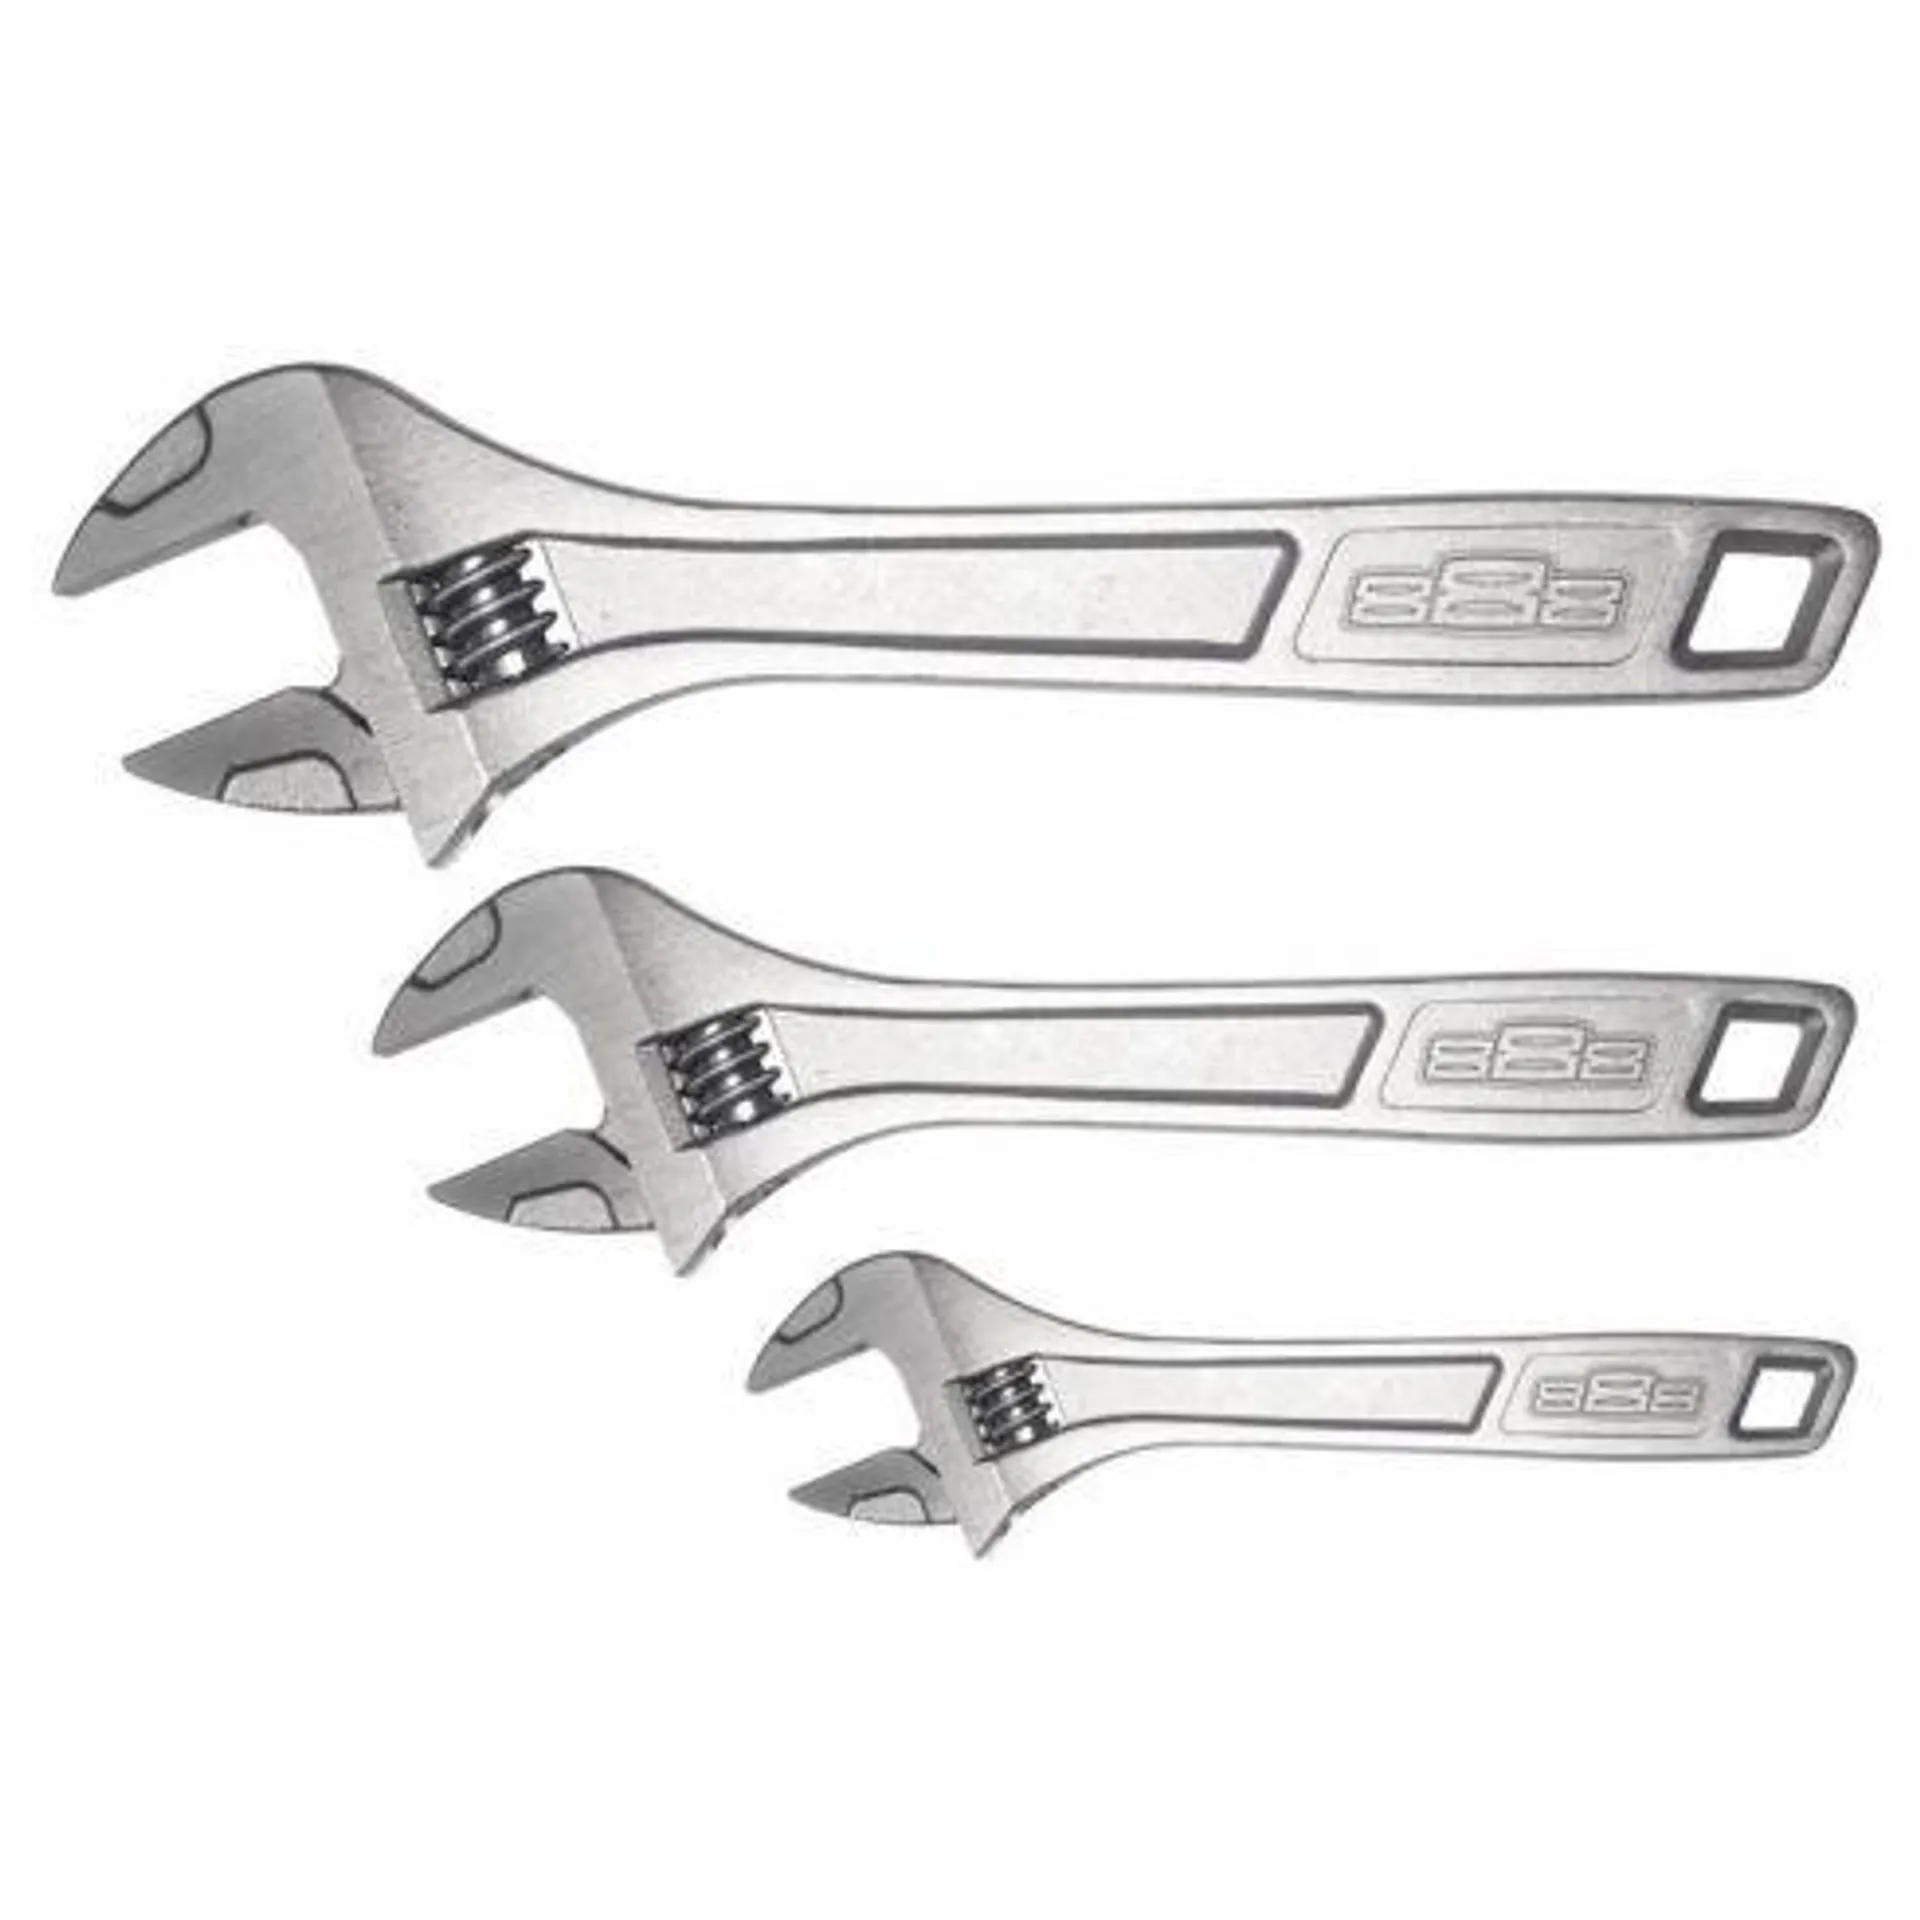 Adjustable Wrench Set 3 Piece 150, 200 & 250mm